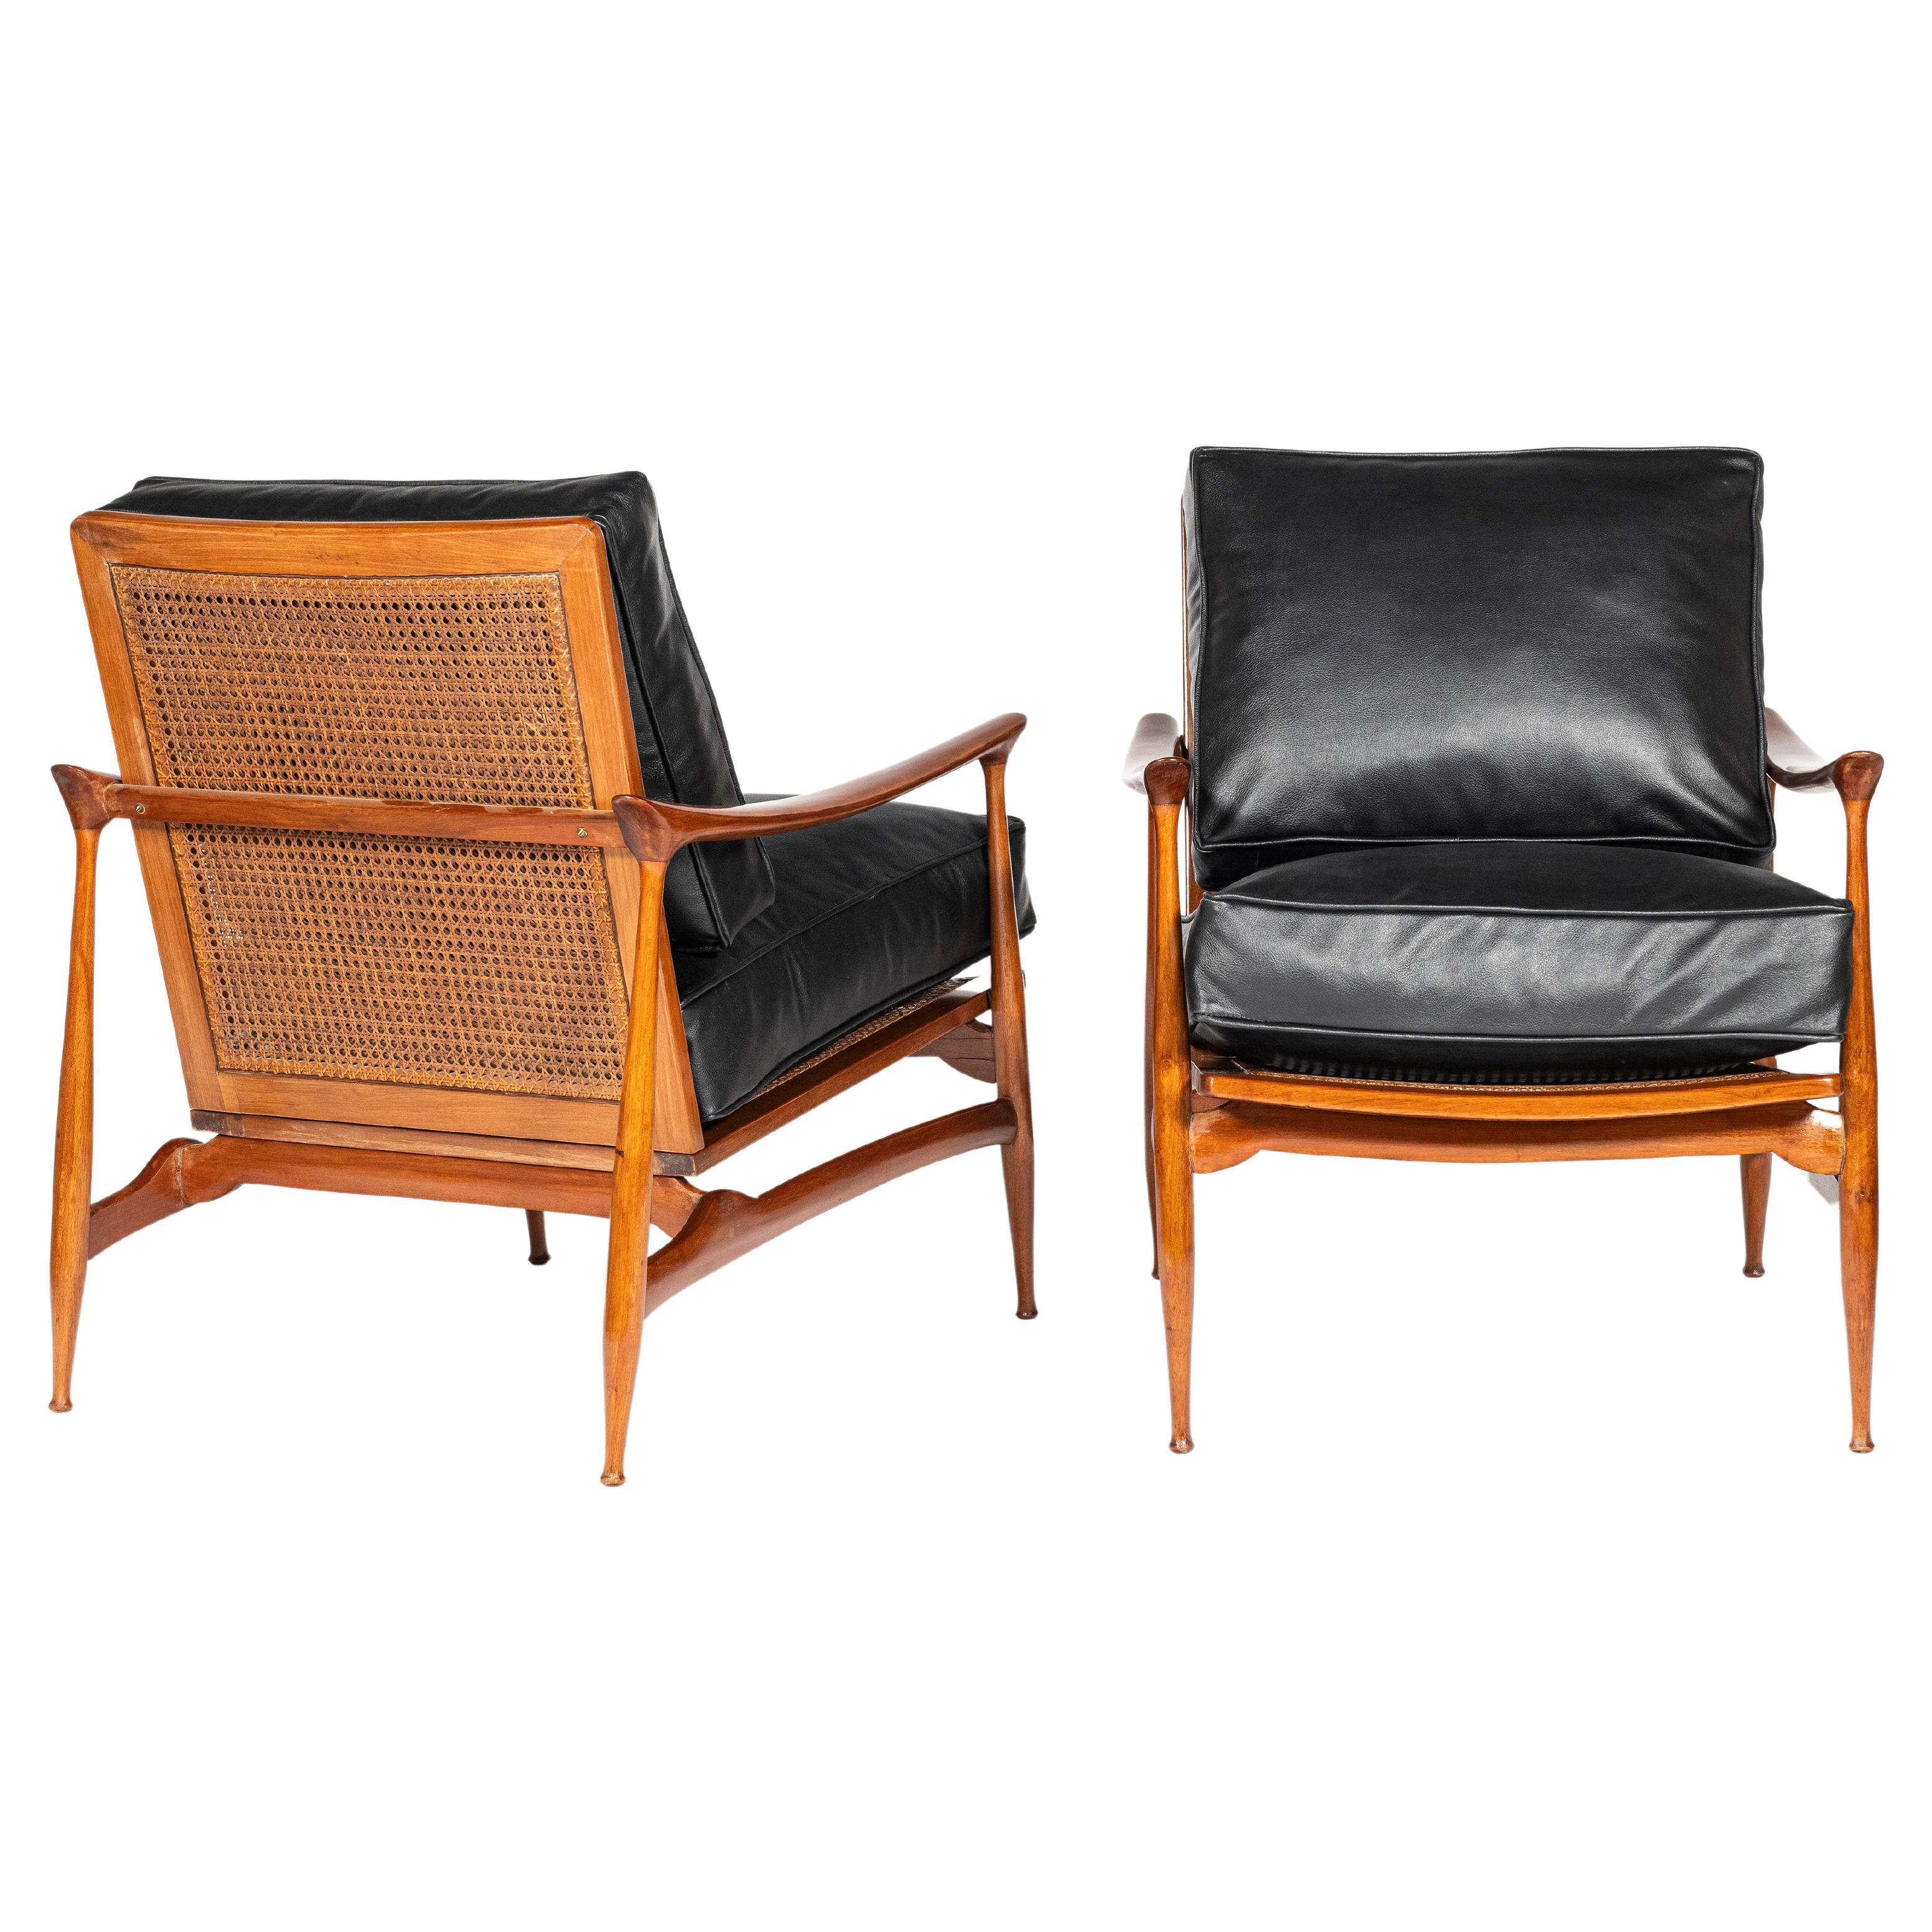 Pair of Wood, Rattan and Leather Scandinavian Armchairs, circa 1960 For Sale